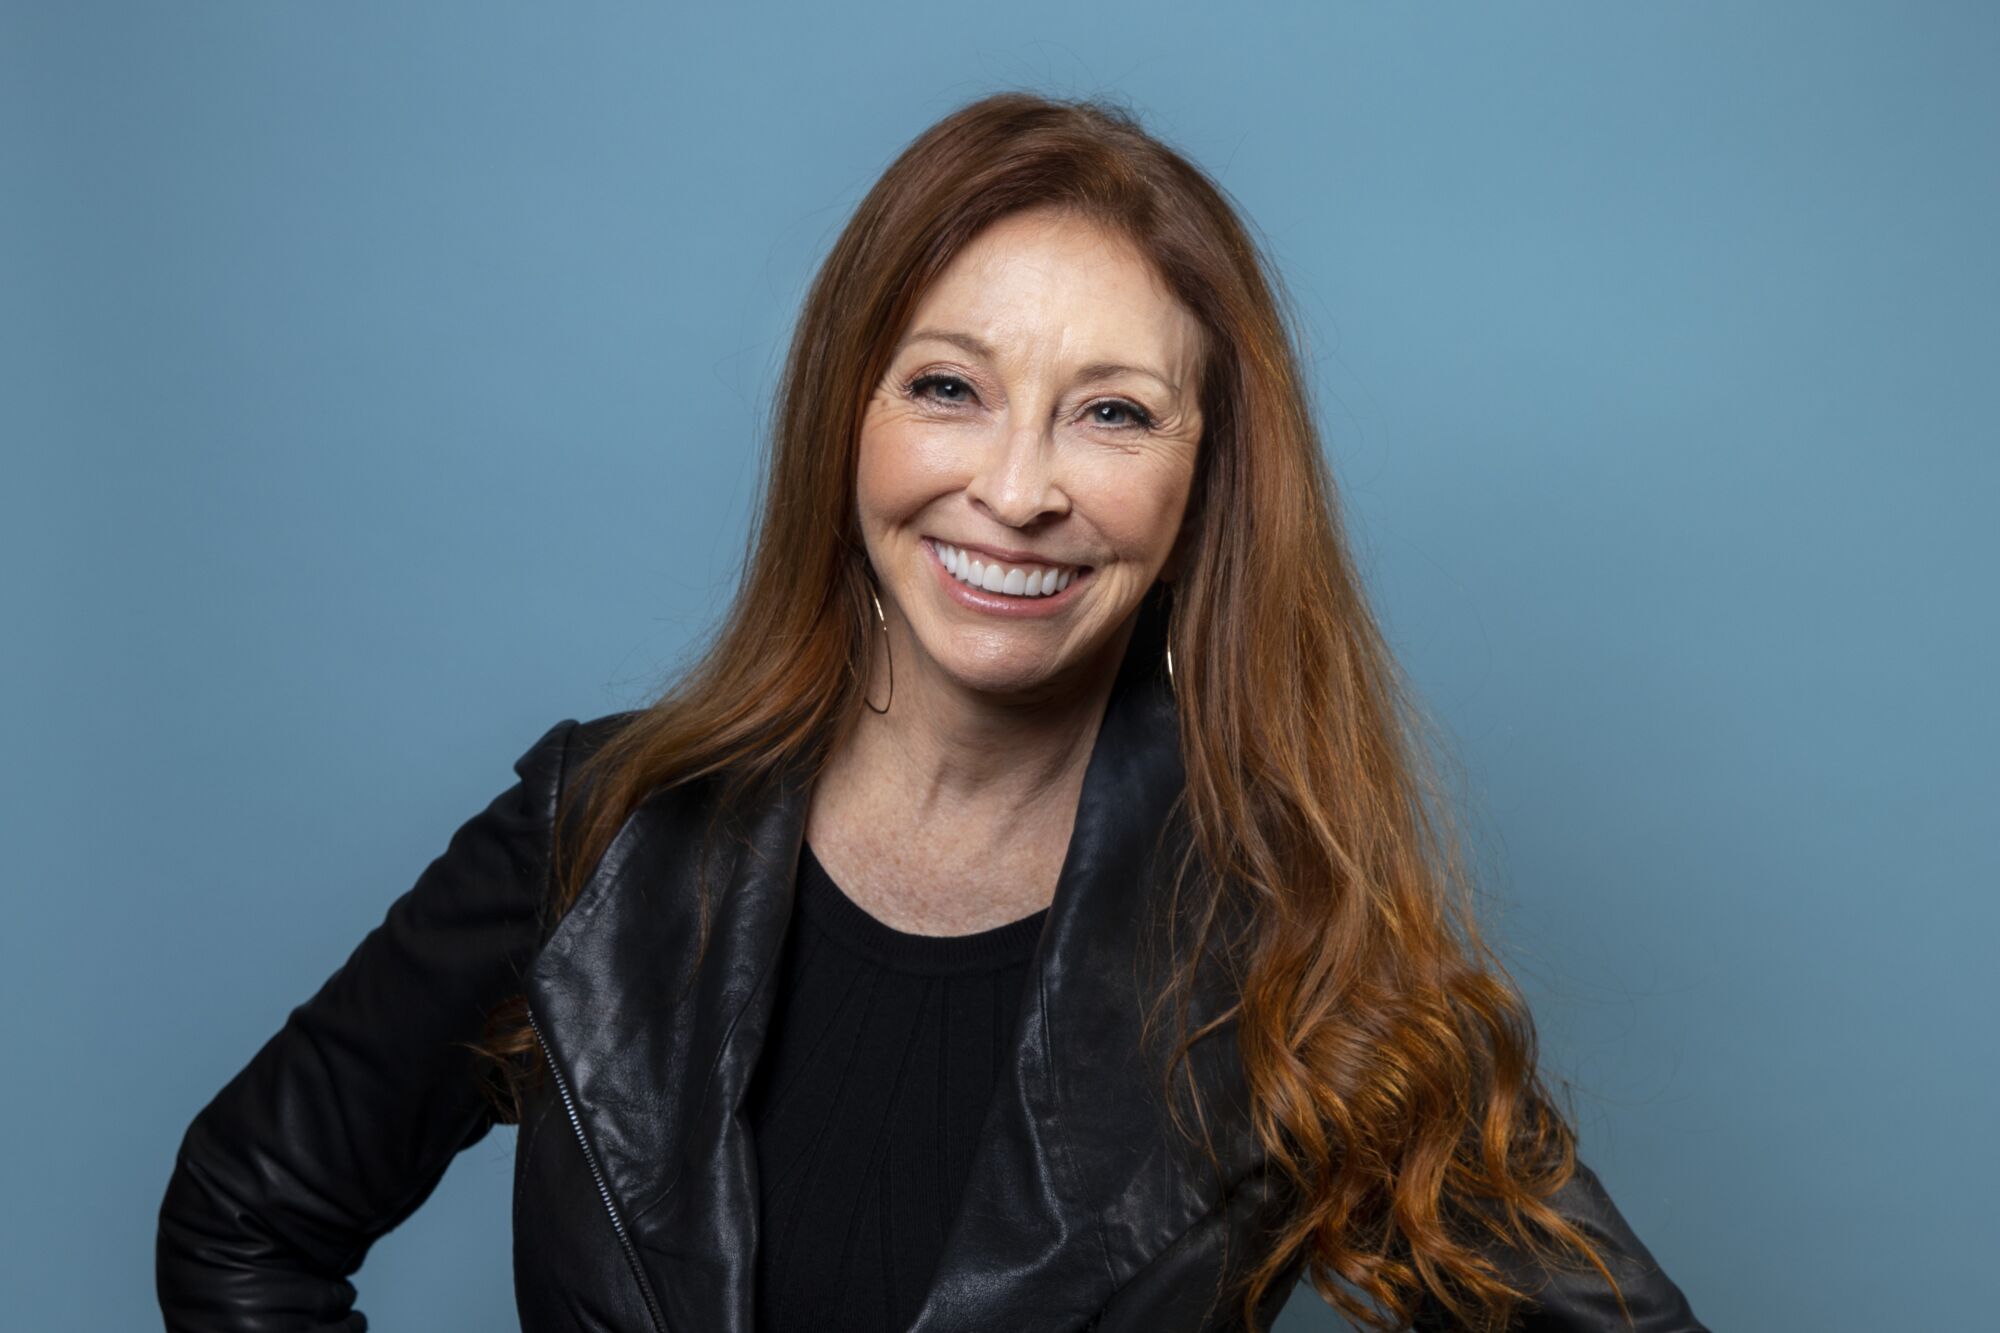 Cassandra Peterson, wearing all black with long red hair, smiles with her hands on her hips